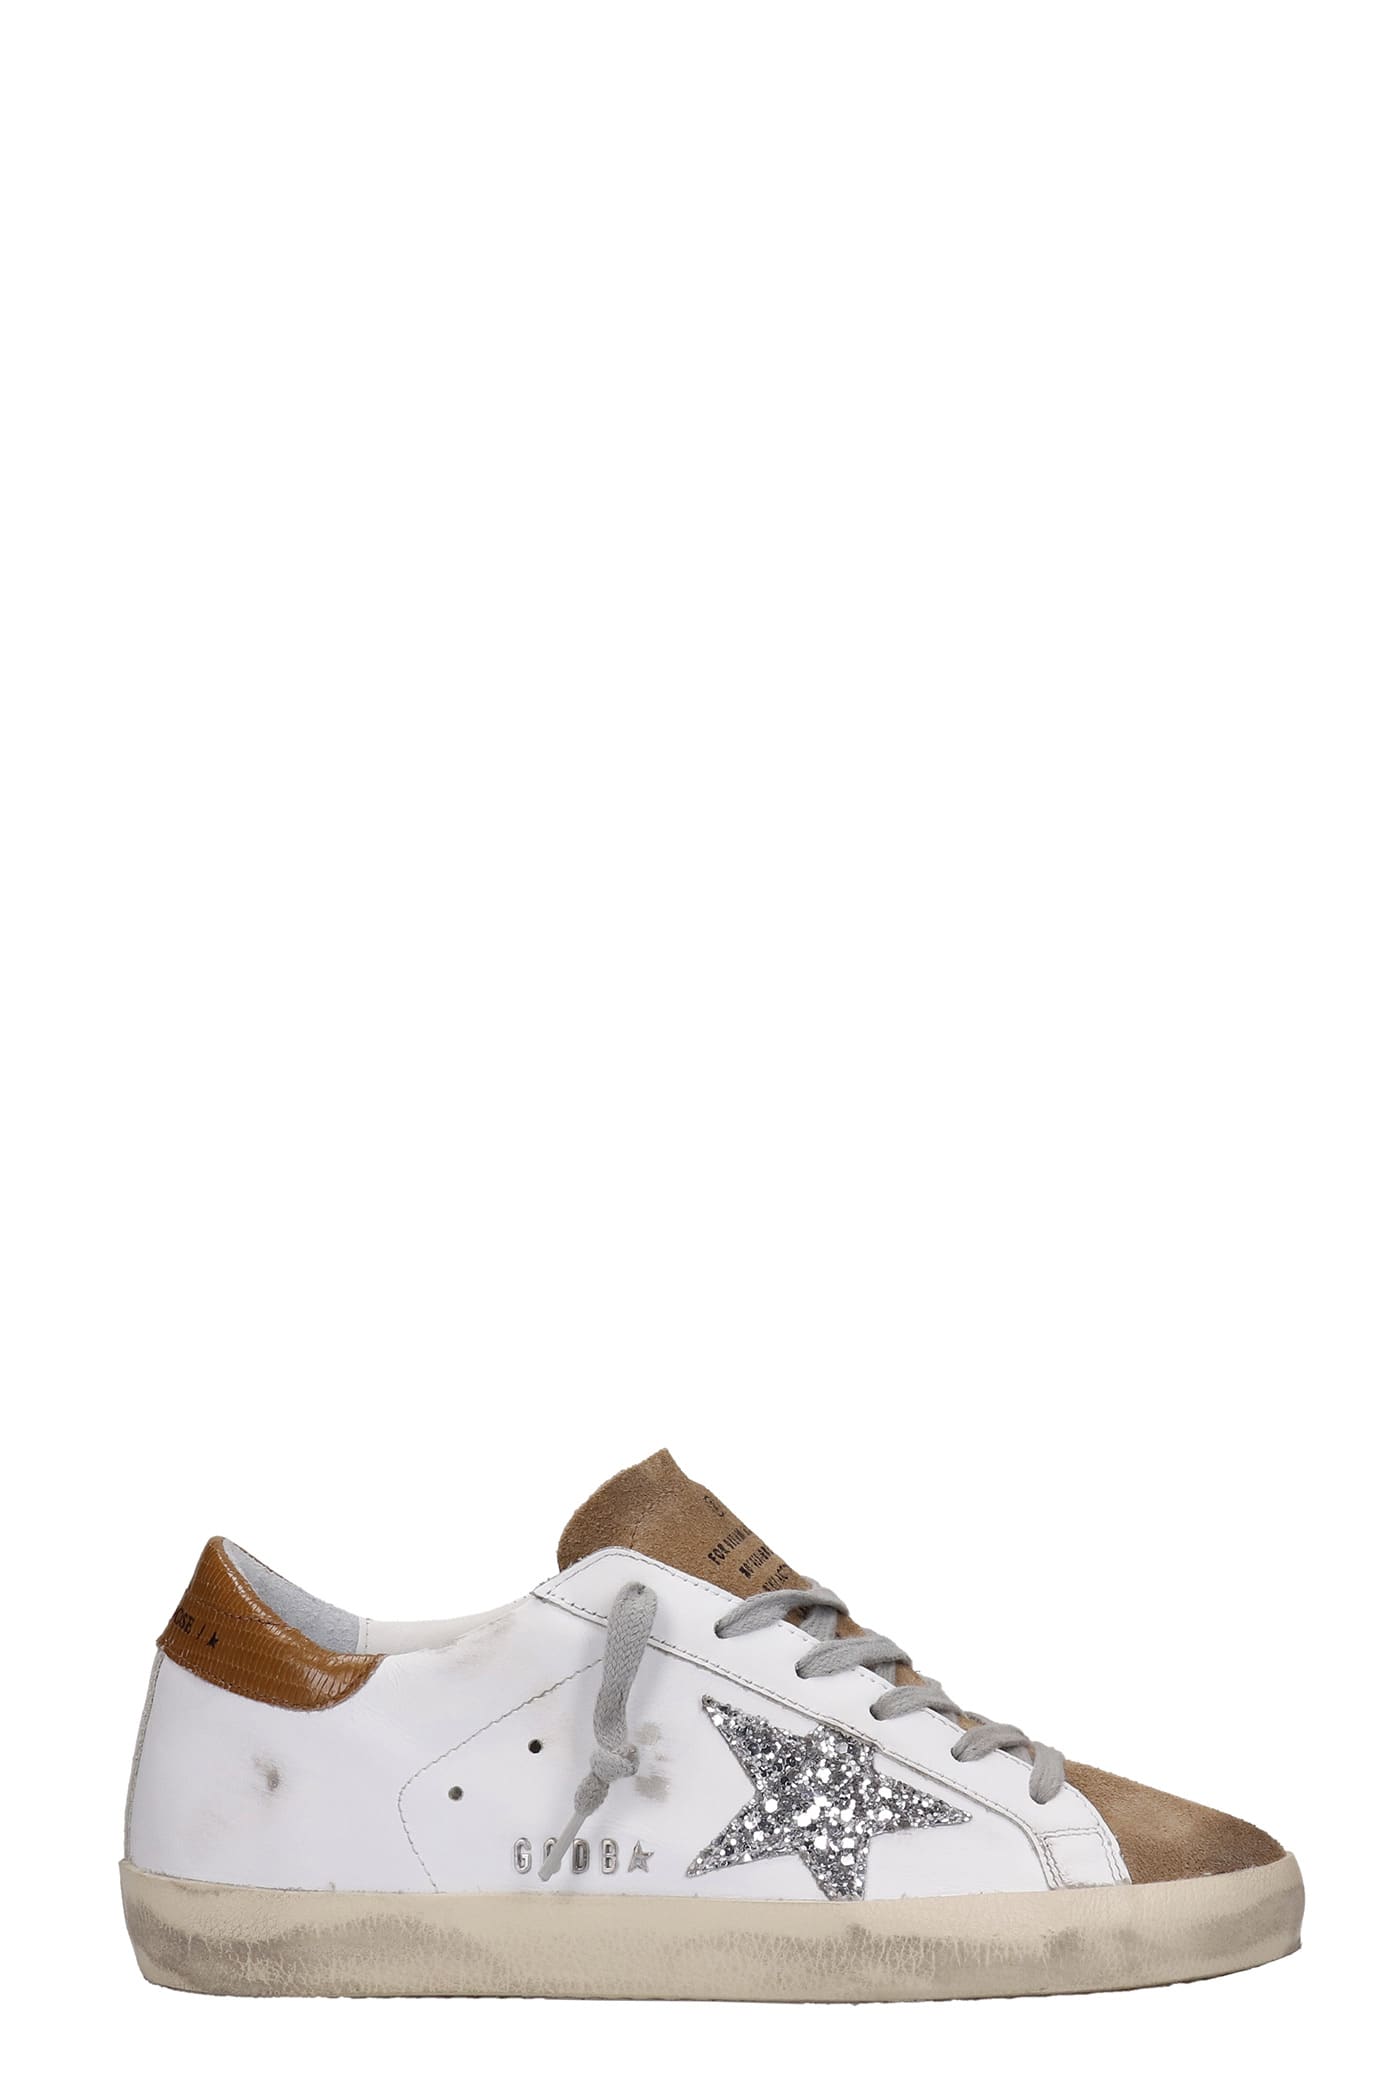 GOLDEN GOOSE SUPERSTAR SNEAKERS IN WHITE SUEDE AND LEATHER